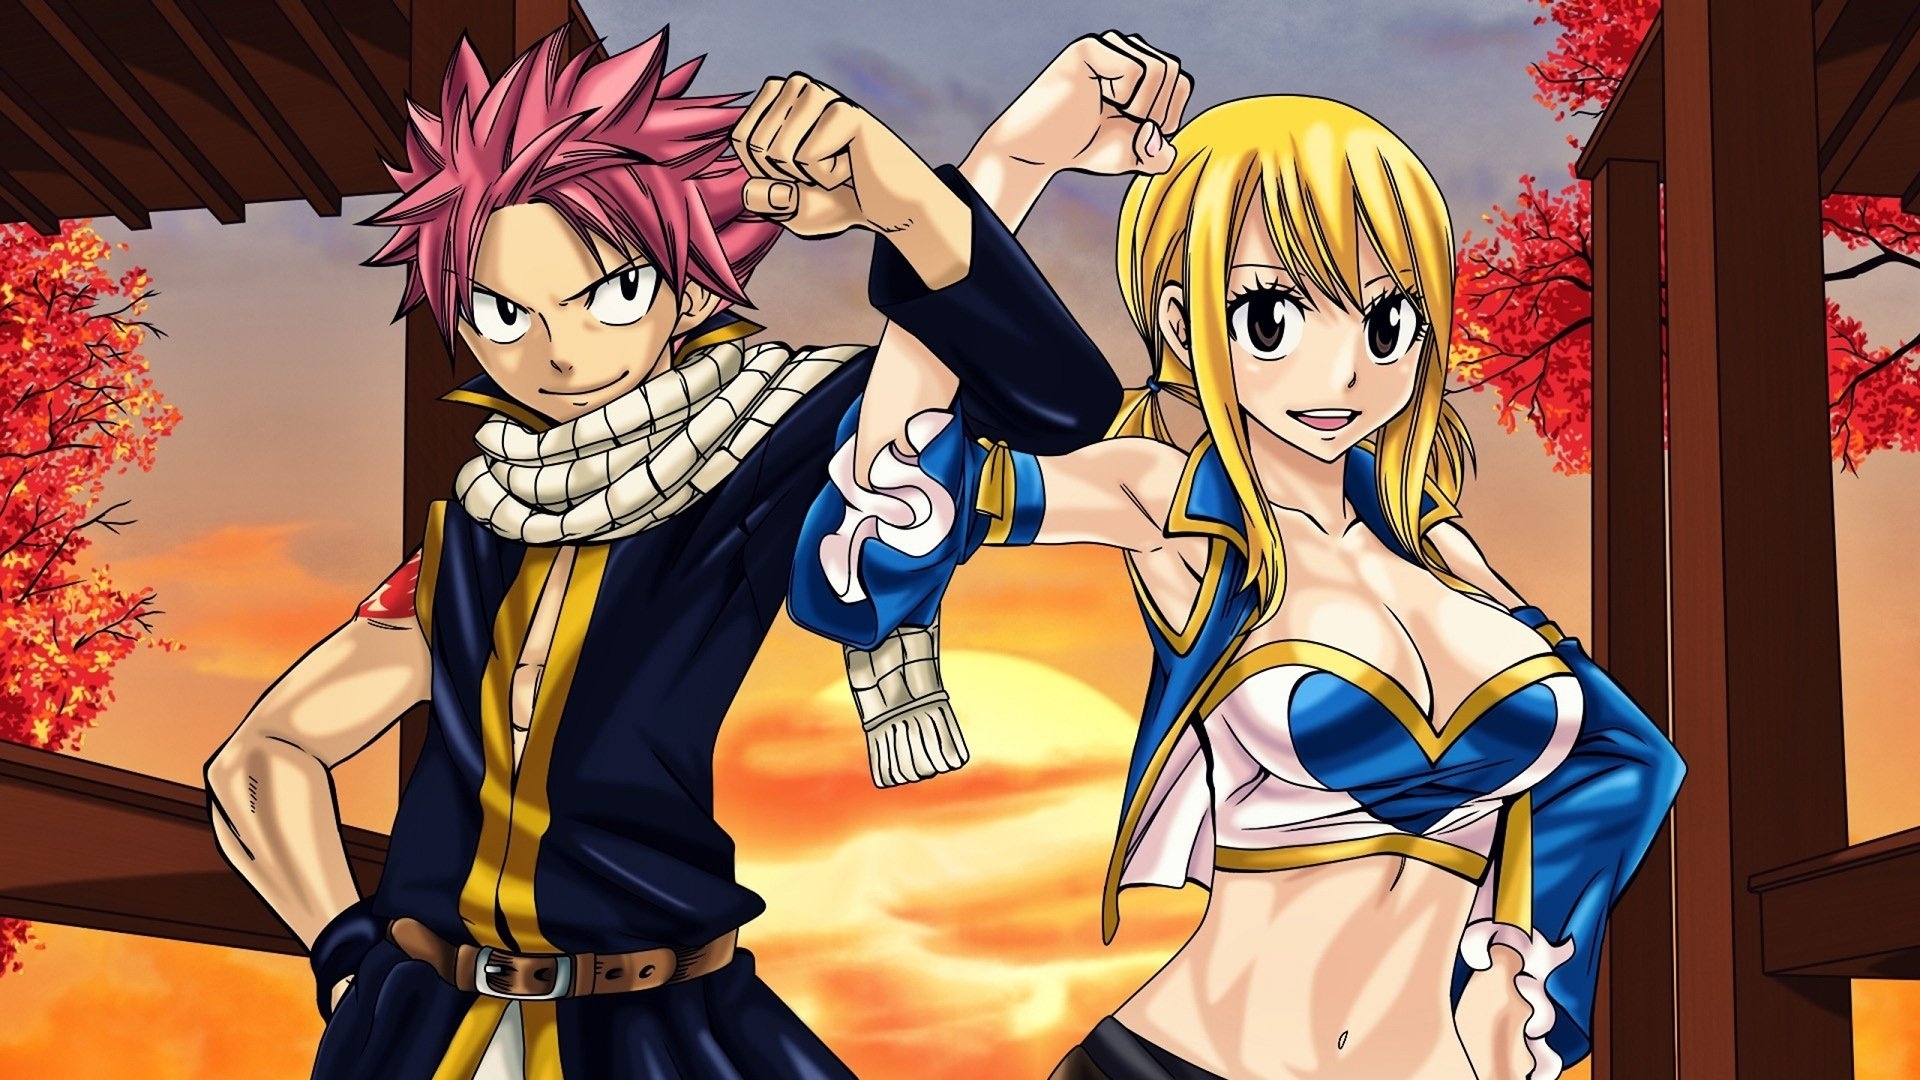 10 New Fairy Tail Lucy Wallpaper FULL HD 1920×1080 For PC Desktop